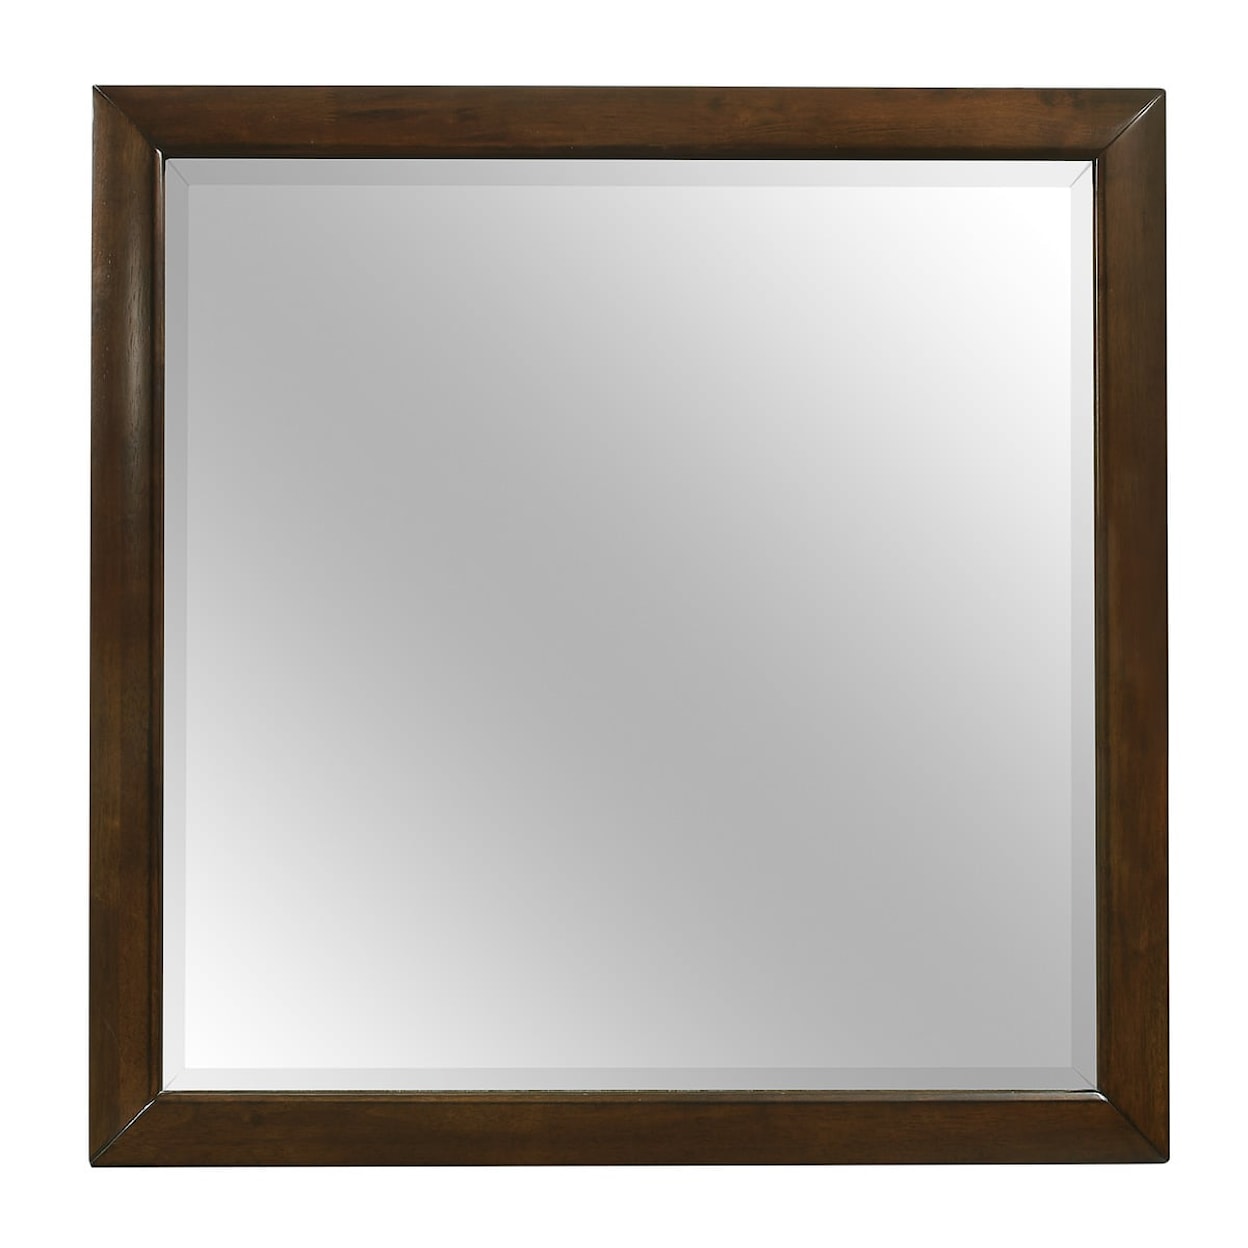 Homelegance Furniture Aziel Square Mirror with Wood Frame